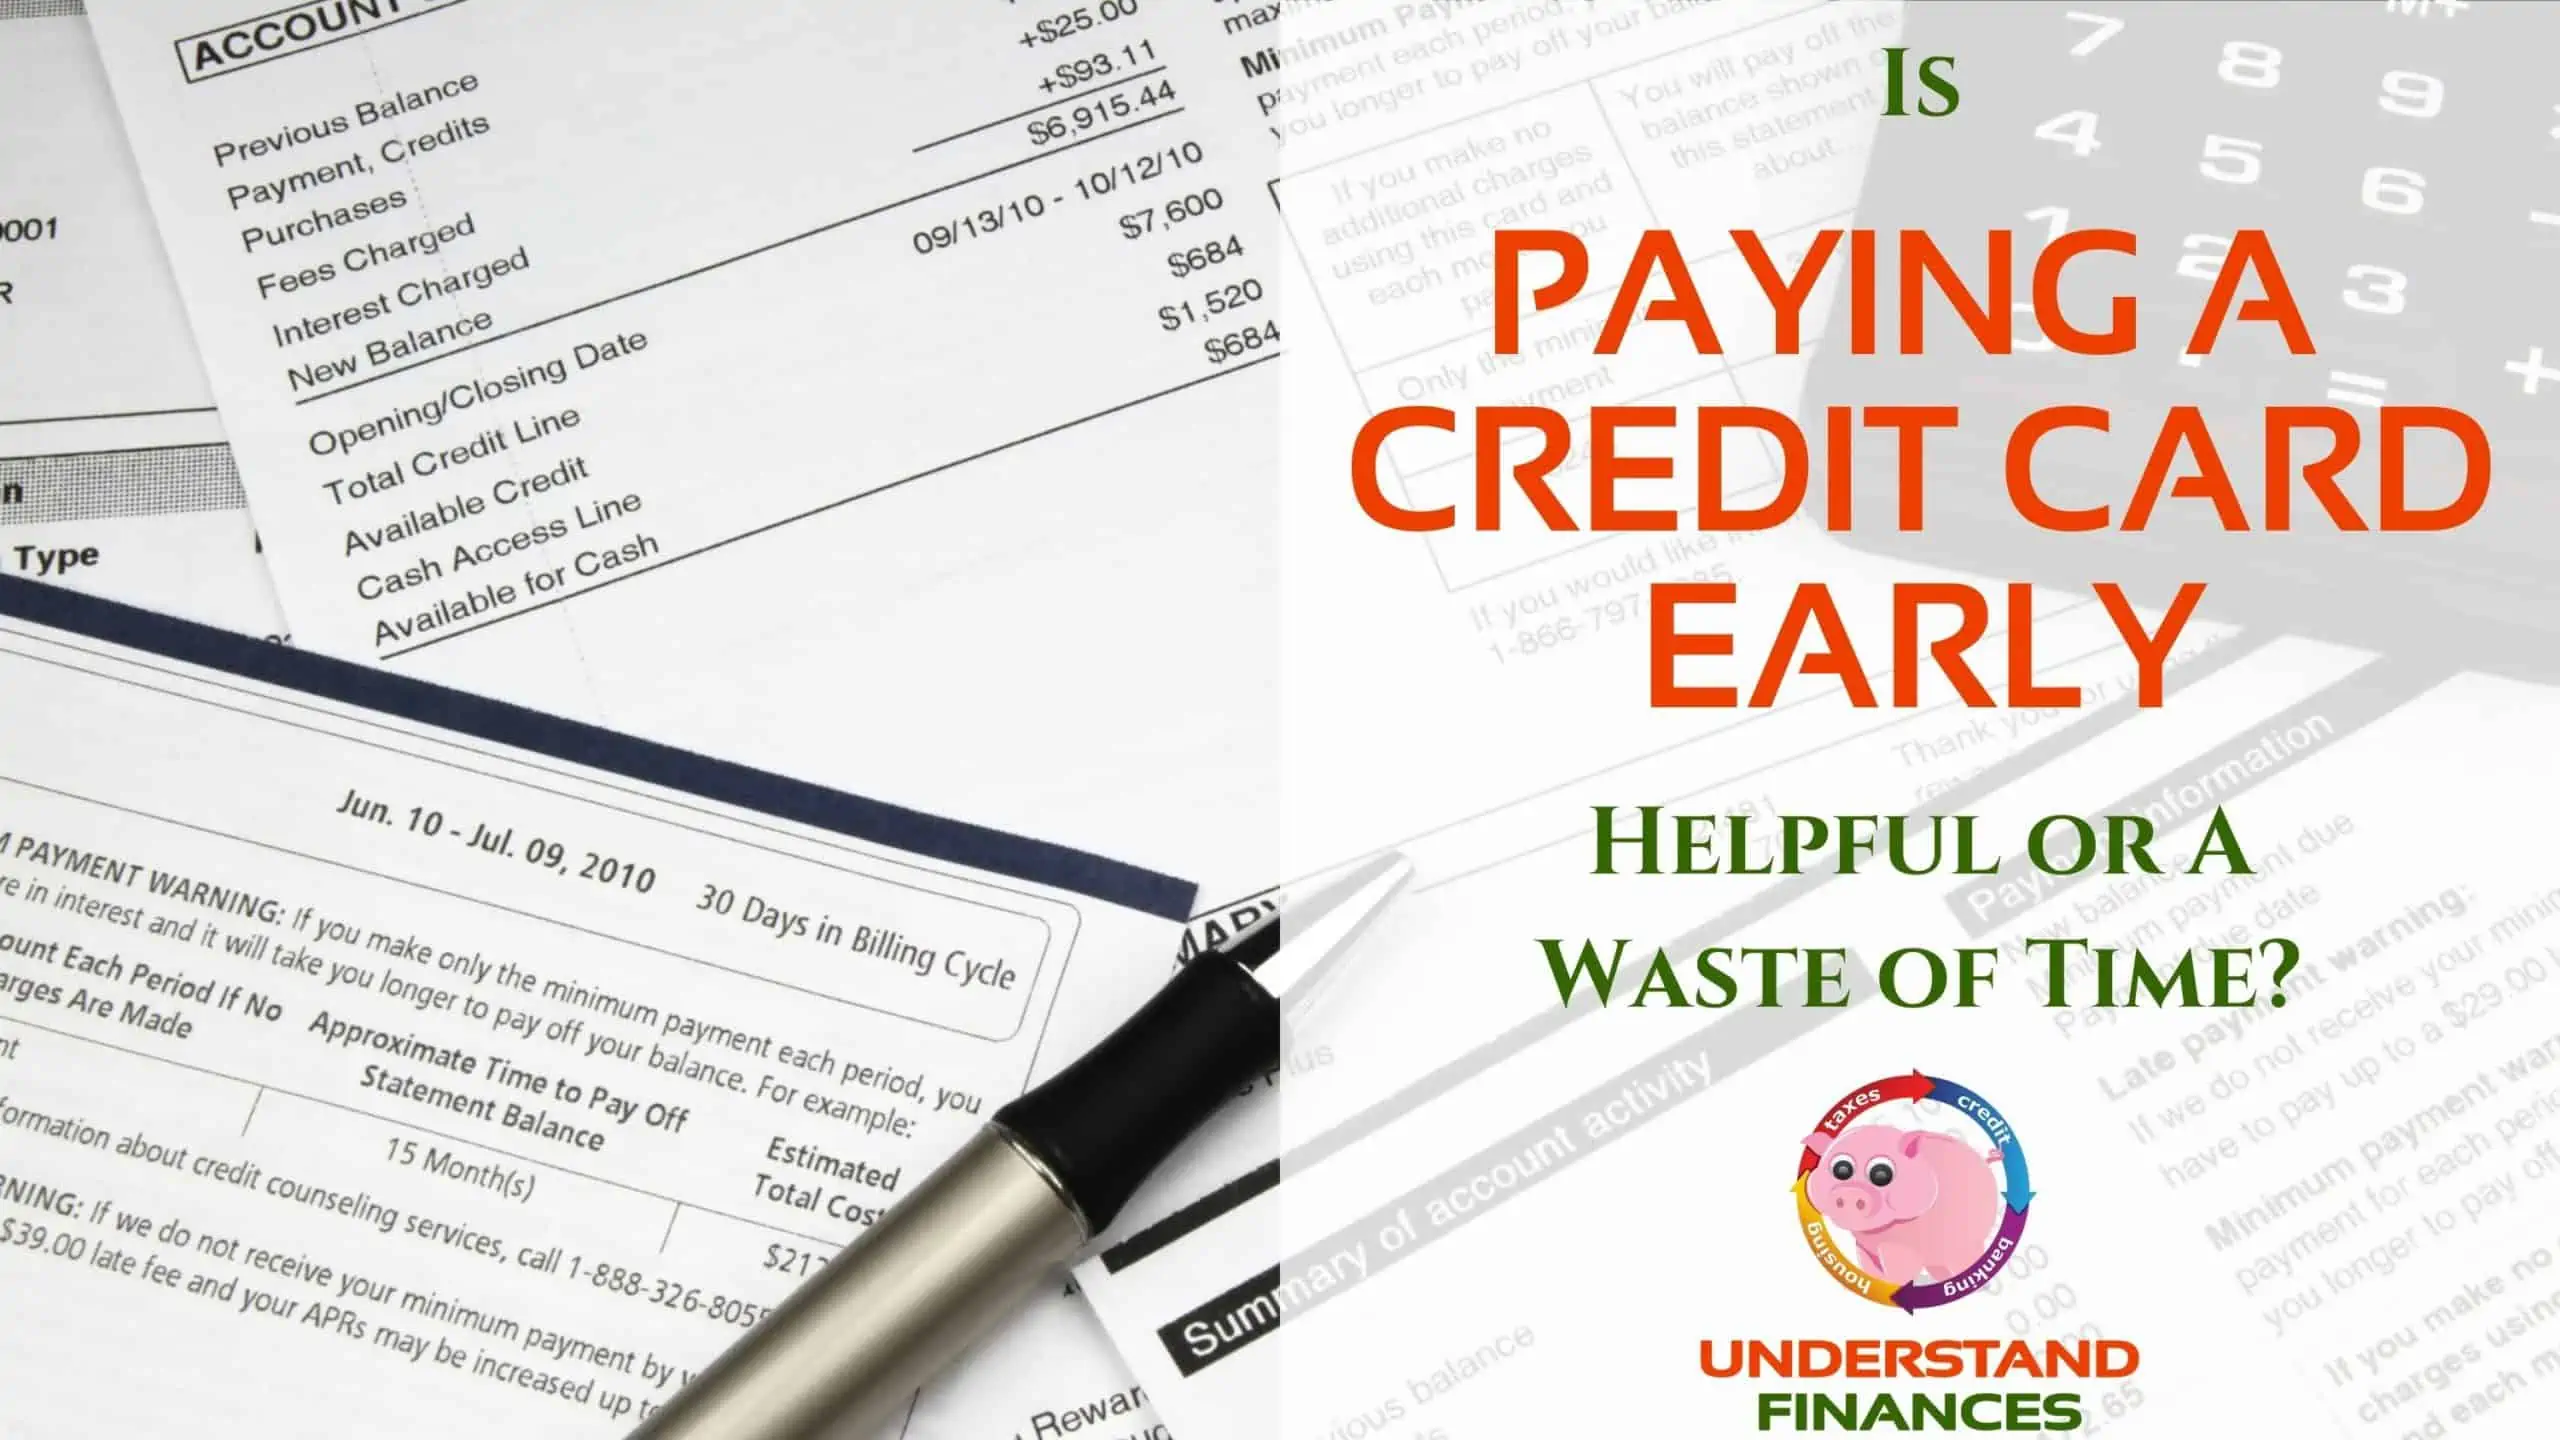 Is Paying A Credit Card Early Helpful Or A Waste of Time?